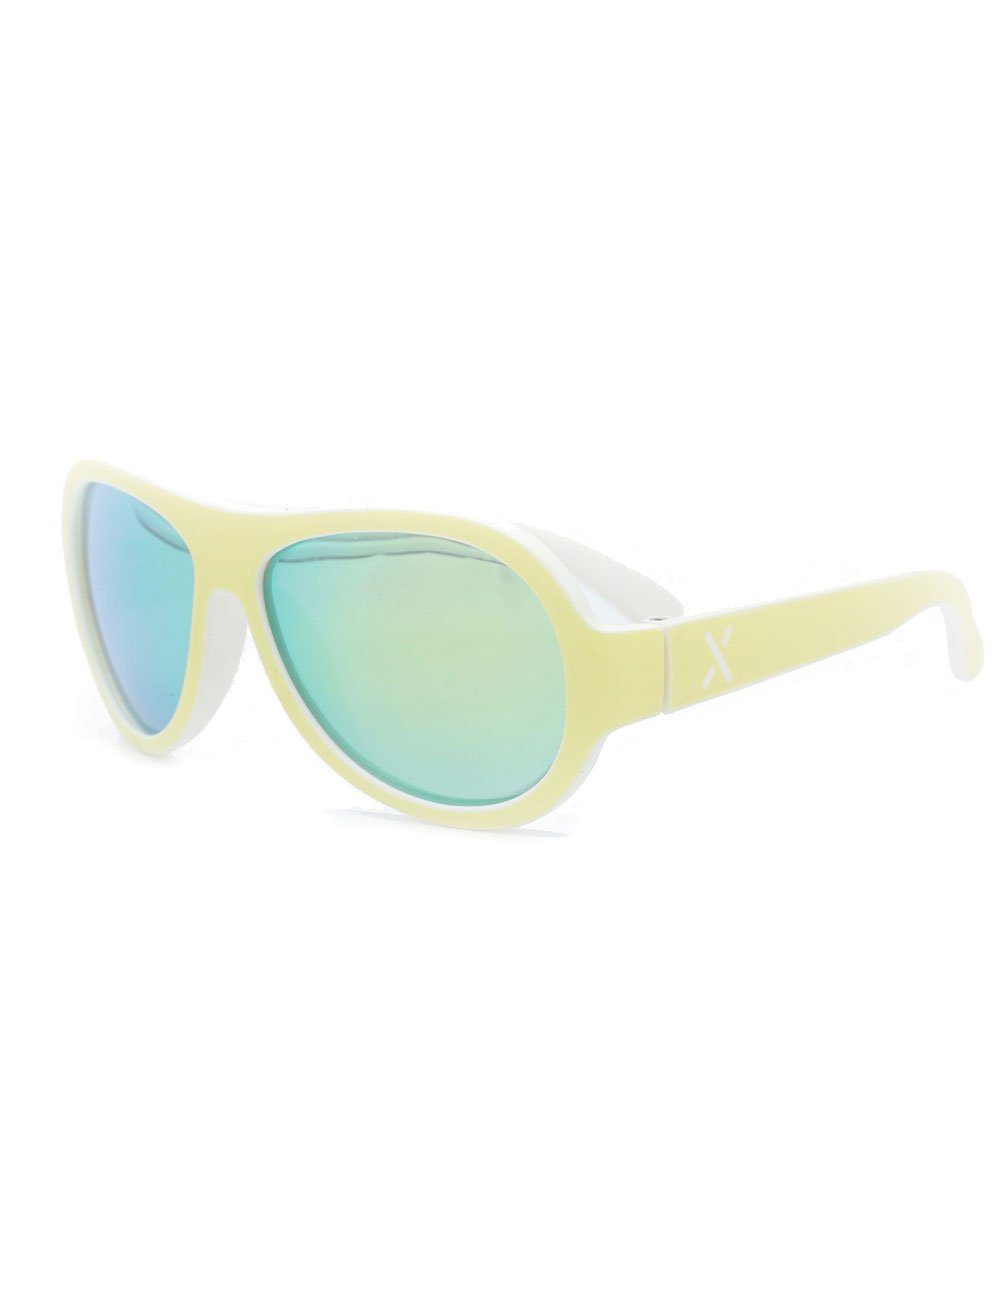 MAXIMO Sonnenbrille KIDS-Sonnenbrille 'round', inkl.Box,Microfaserb. pale yellow